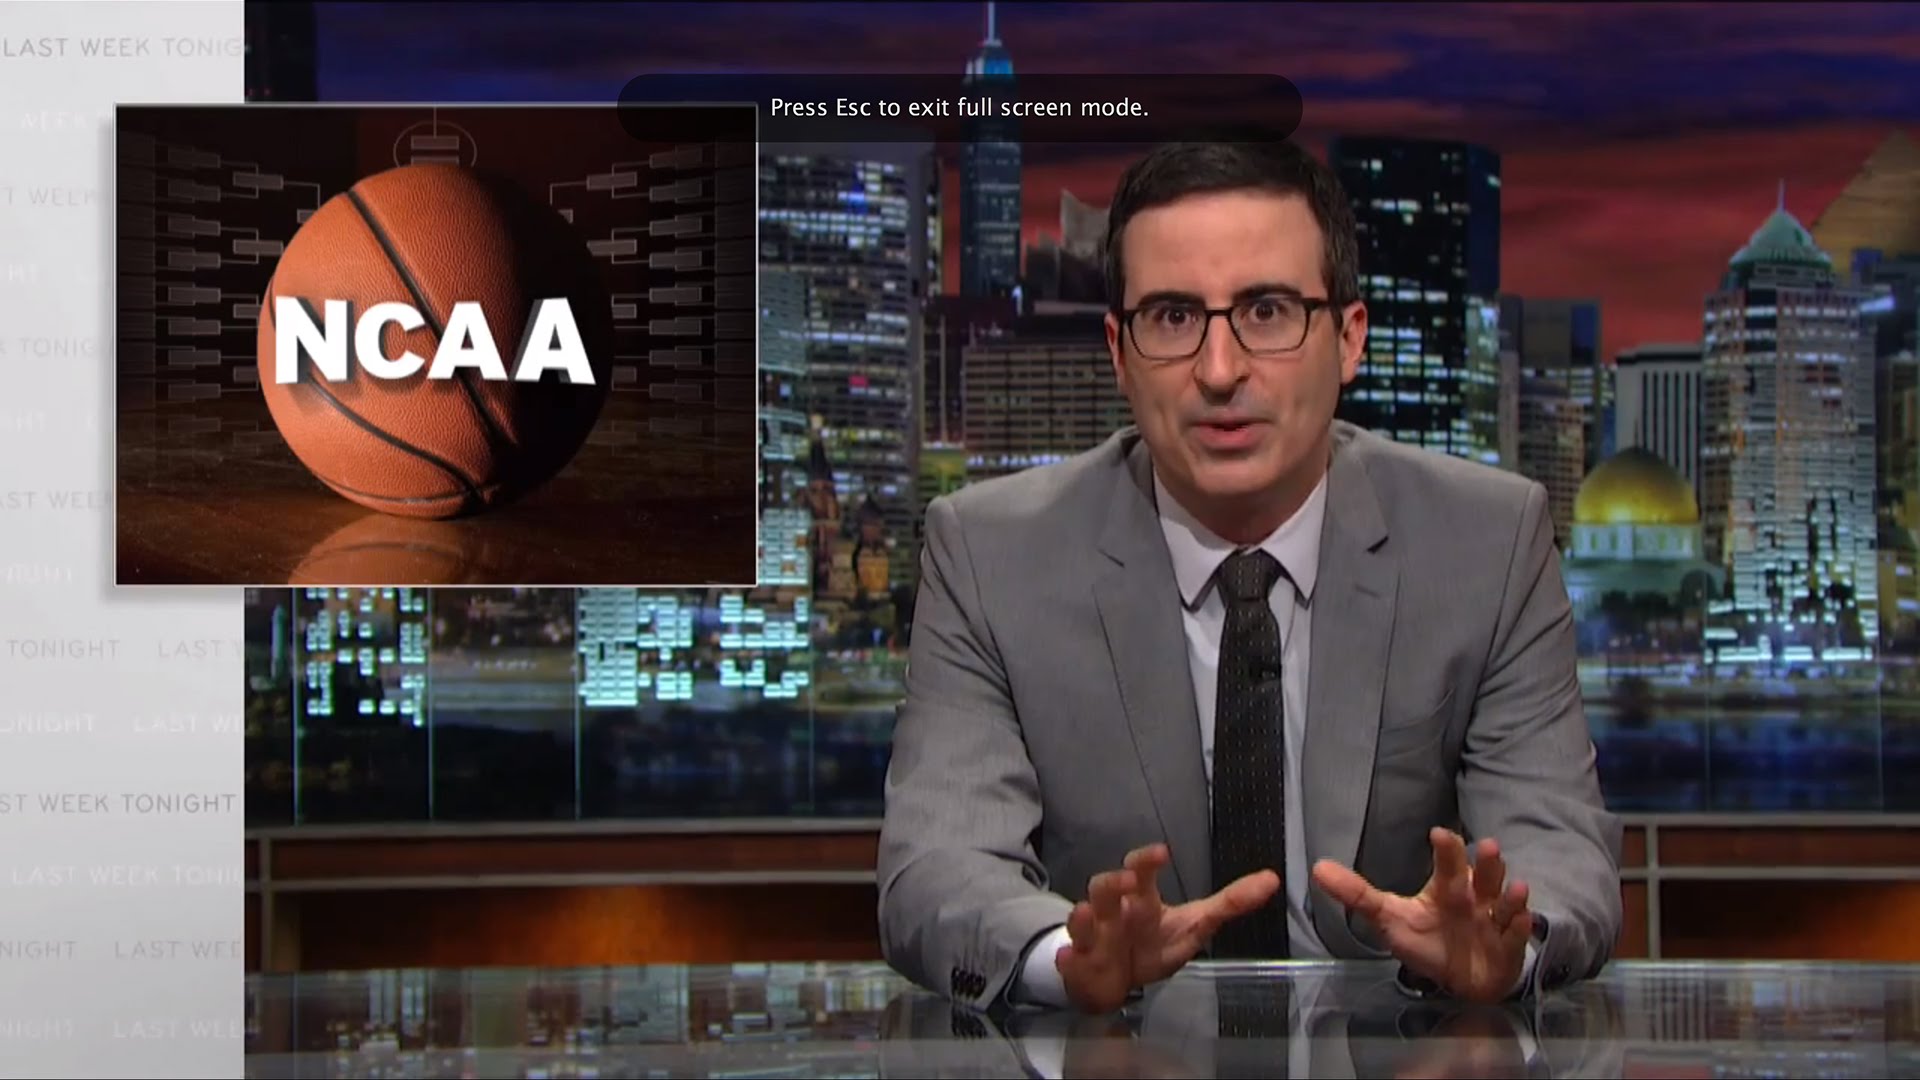 John Oliver rips NCAA for not paying athletes